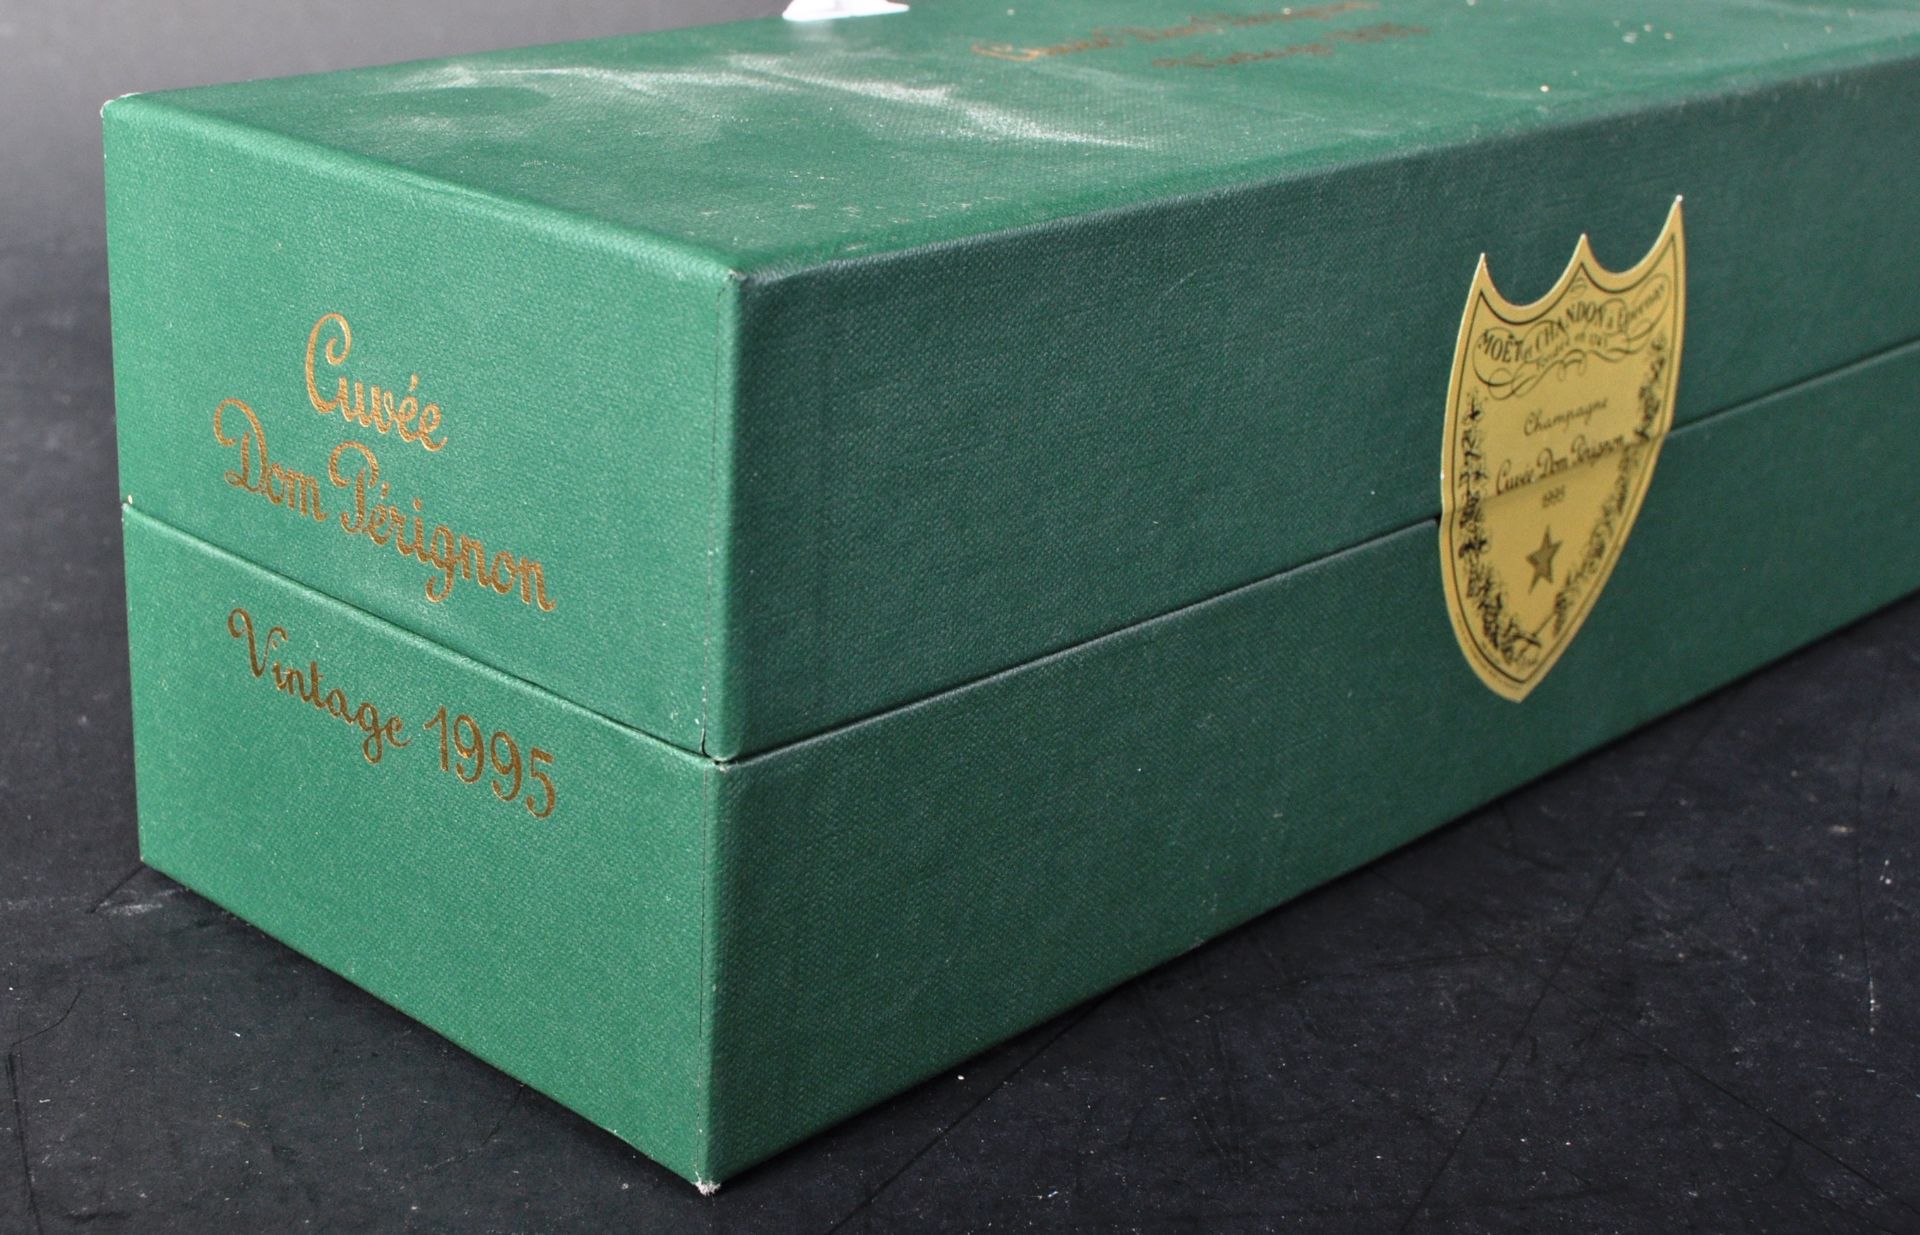 SEALED BOTTLE OF DOM PERIGNON CHAMPAGNE - Image 2 of 2